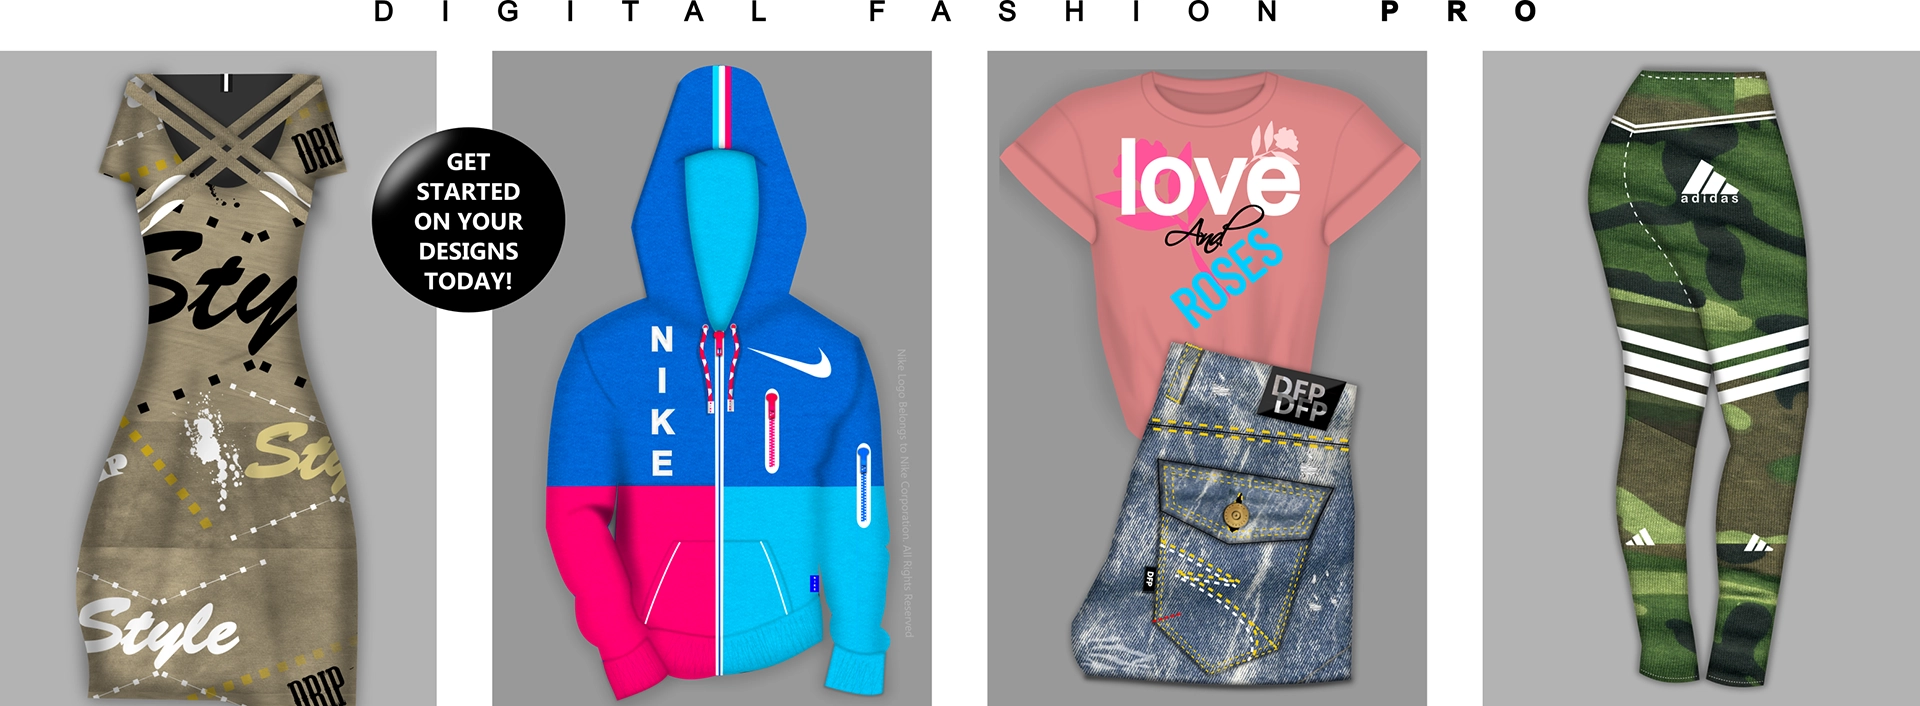 Digital Fashion Pro - Fashion Design Software - Design Your Own Clothes Sketches - Top Collage - dress - nike jacket - love tshirt